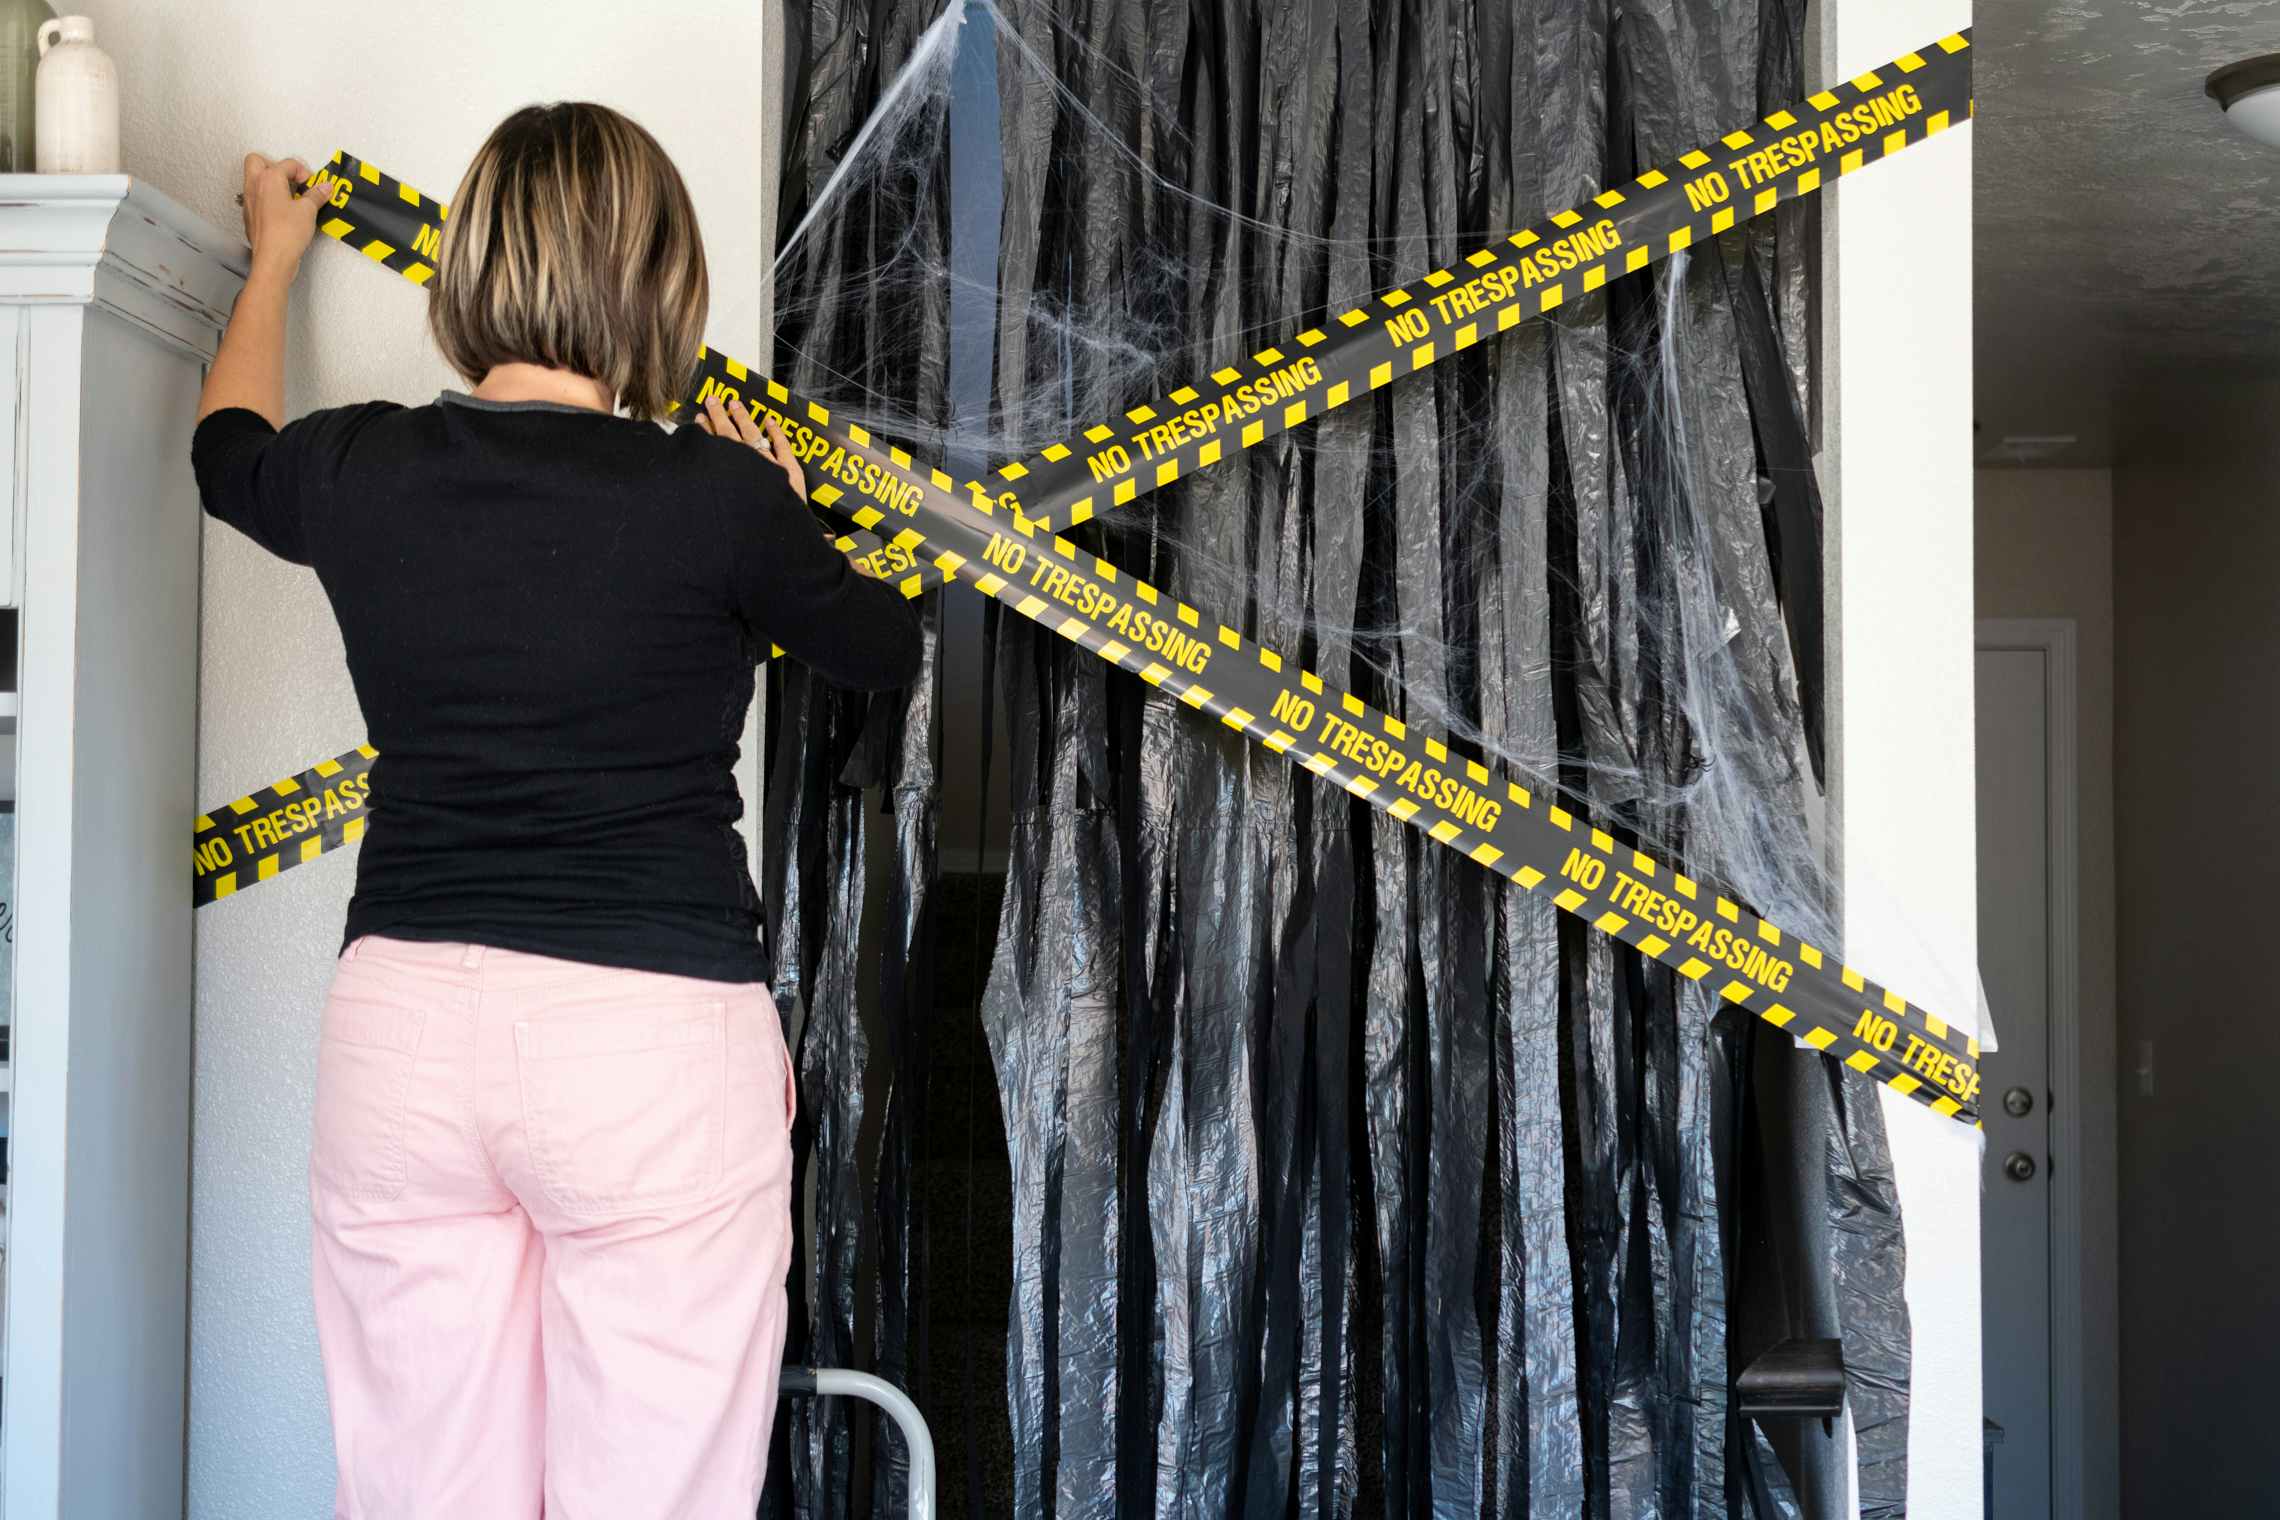 A woman hanging do not enter caution tape over a doorway covered with cut garbage bags.